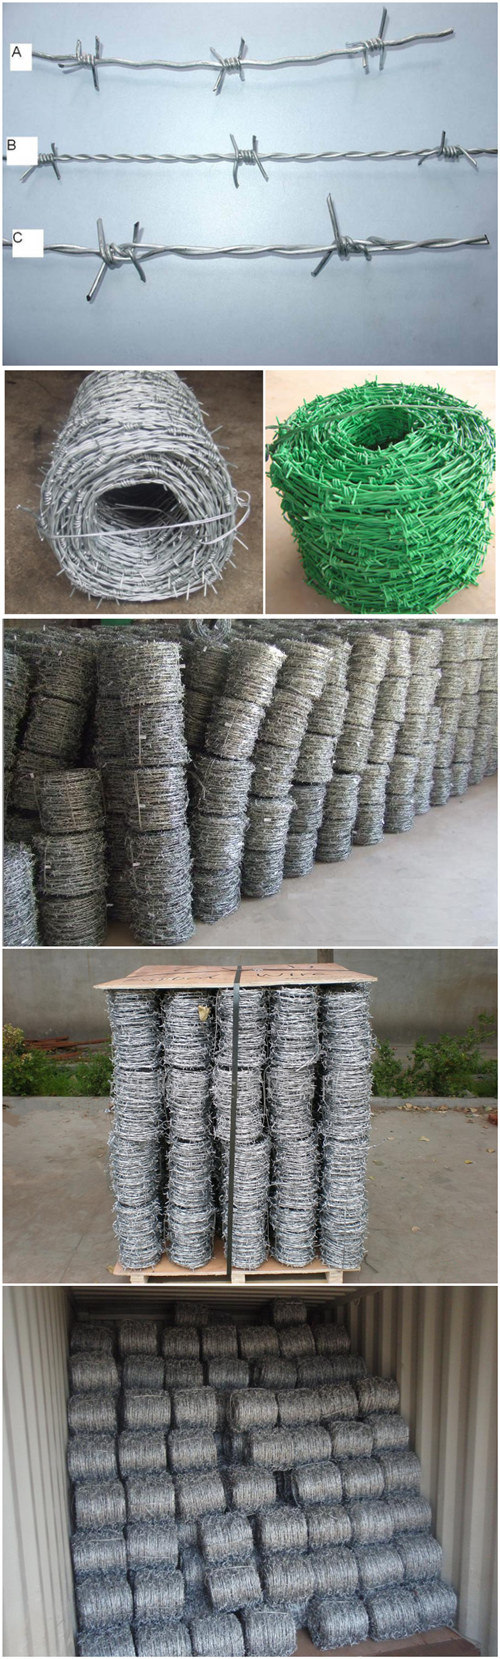 China Low Price Barbed Wire Fencing Hot Sale